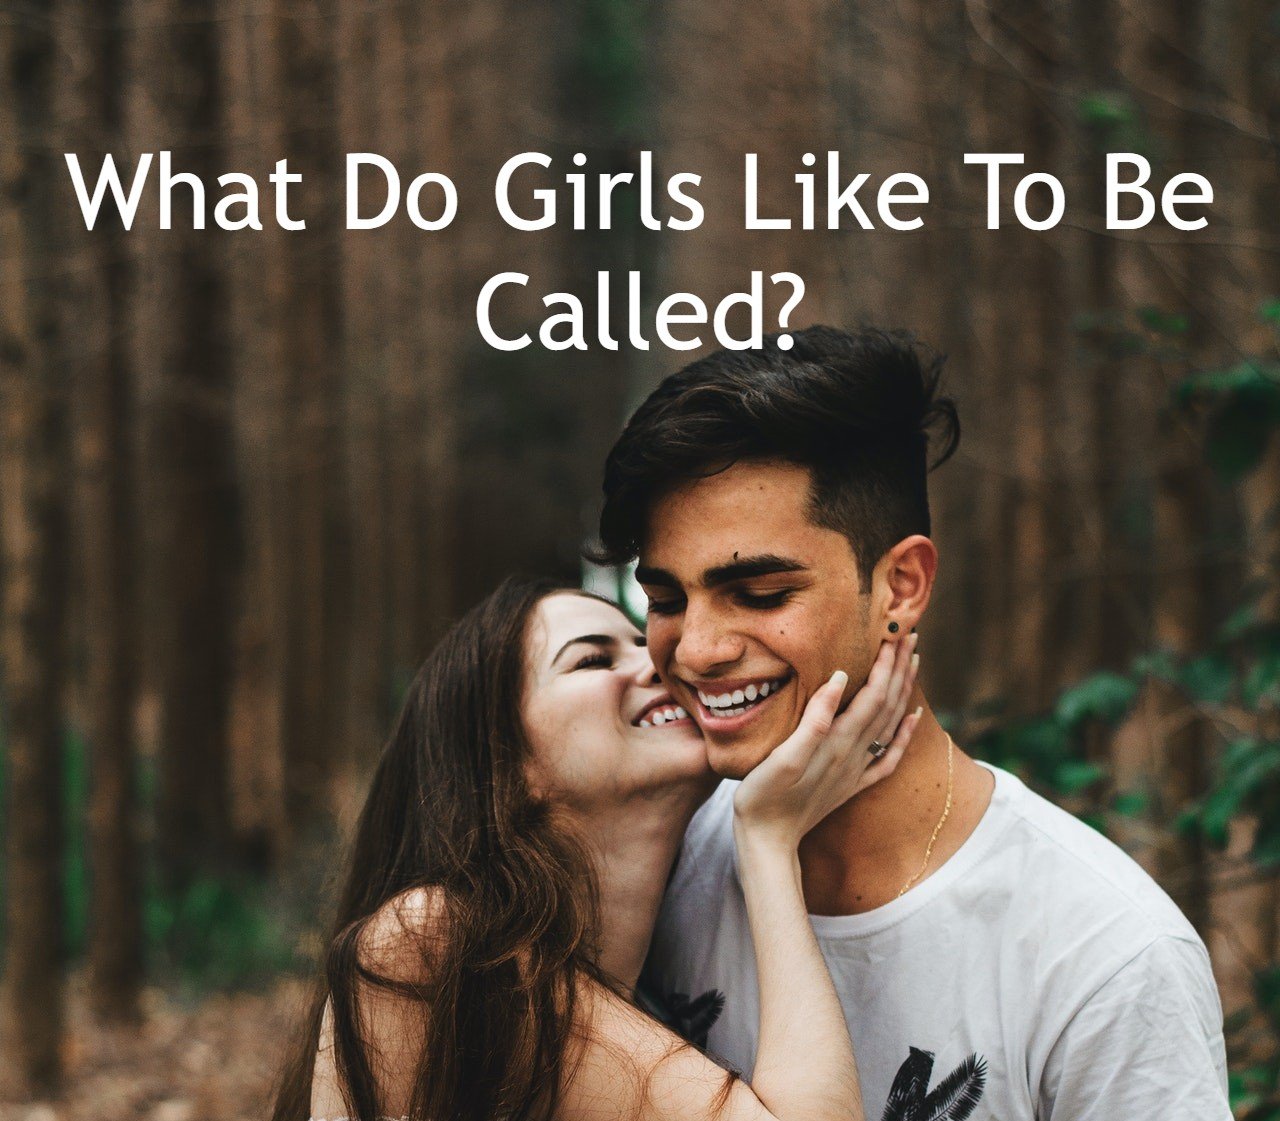 What Do Girls Like To Be Called?